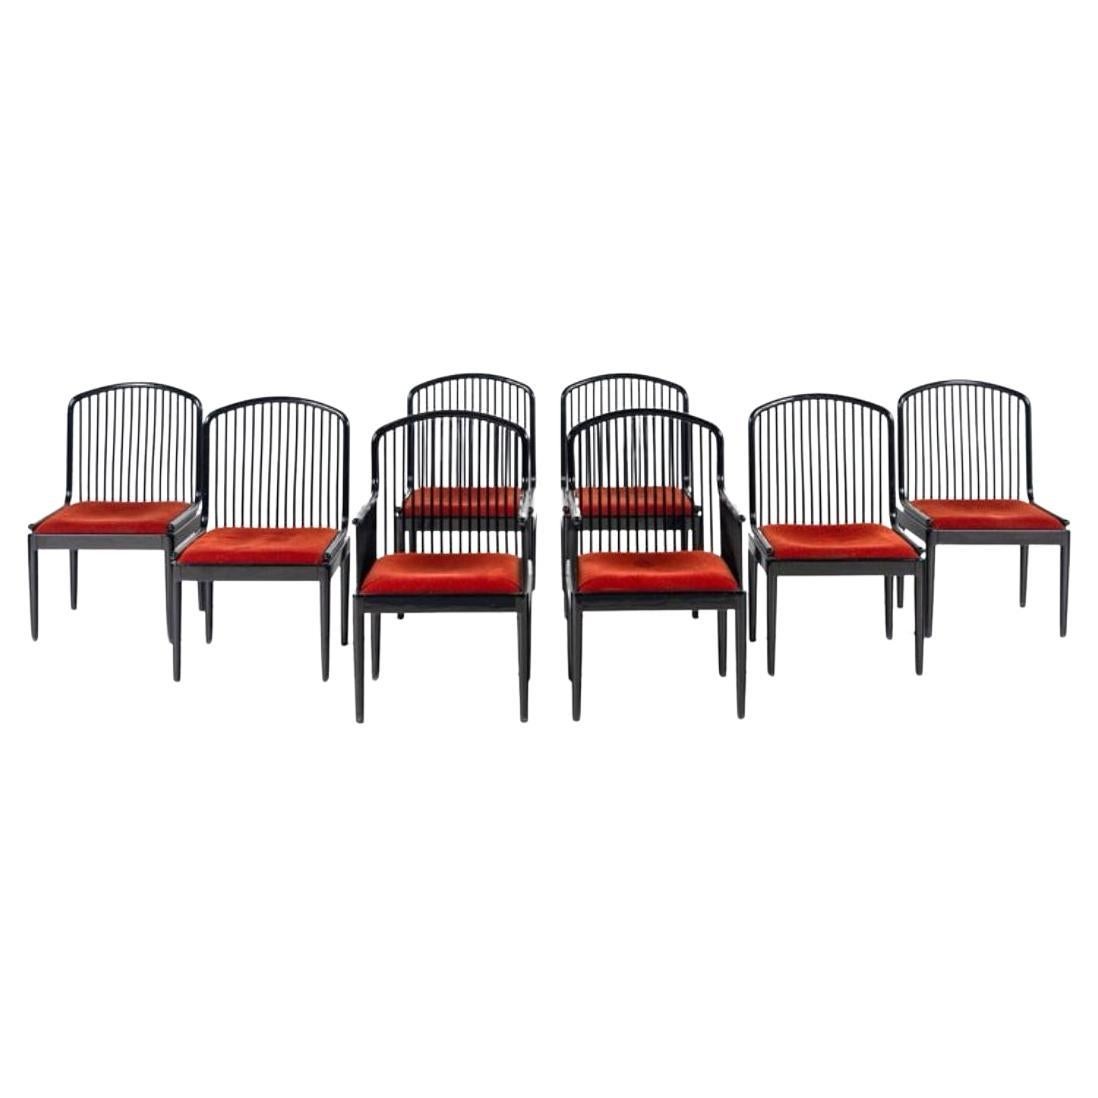 Set of 8 Andover Black Lacquer Dining Chairs by Davis Allen for Stendig